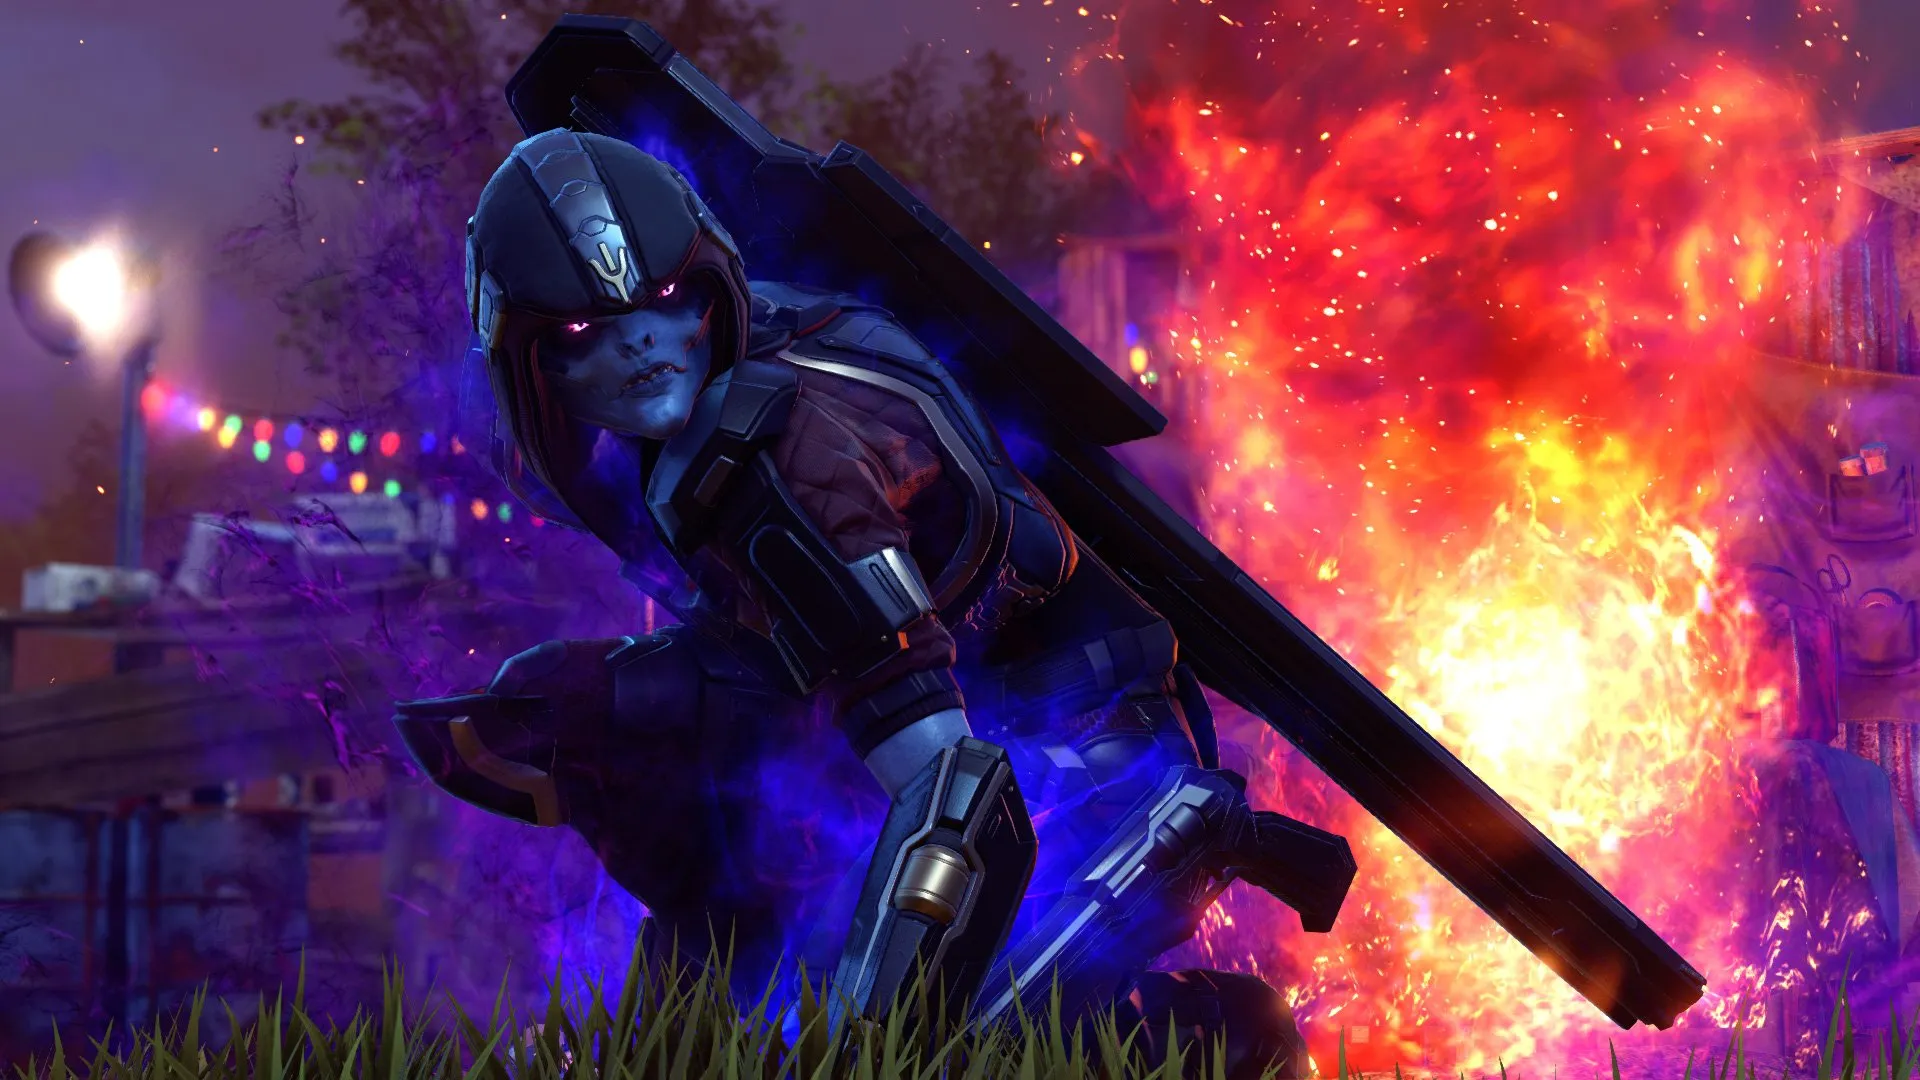 XCOM 2: War of the Chosen guide and tips you need to know before